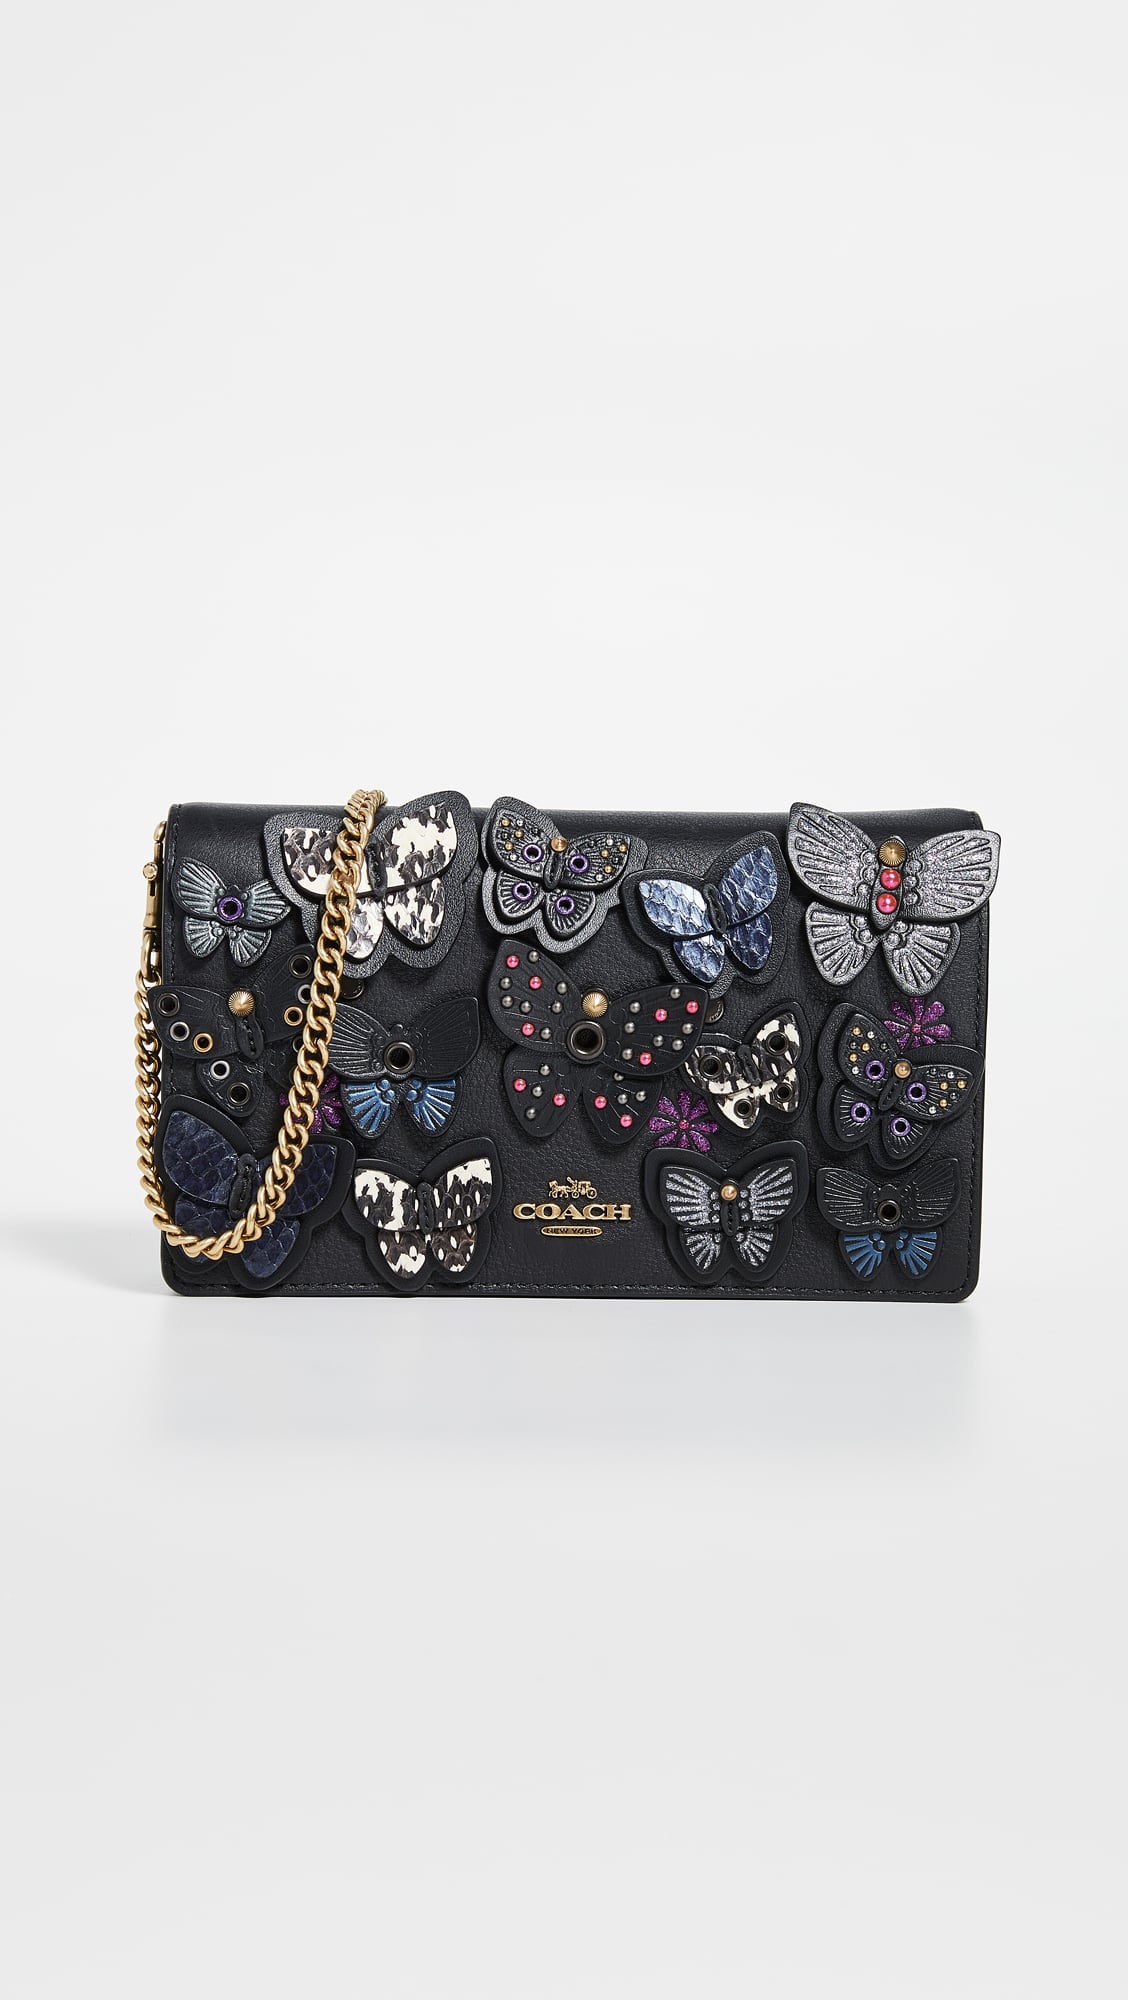 Coach 1941 Butterfly Applique Callie Bag | Get Carried Away: Your Guide to  the 18 Best Bags of Summer 2019 | POPSUGAR Fashion Photo 8